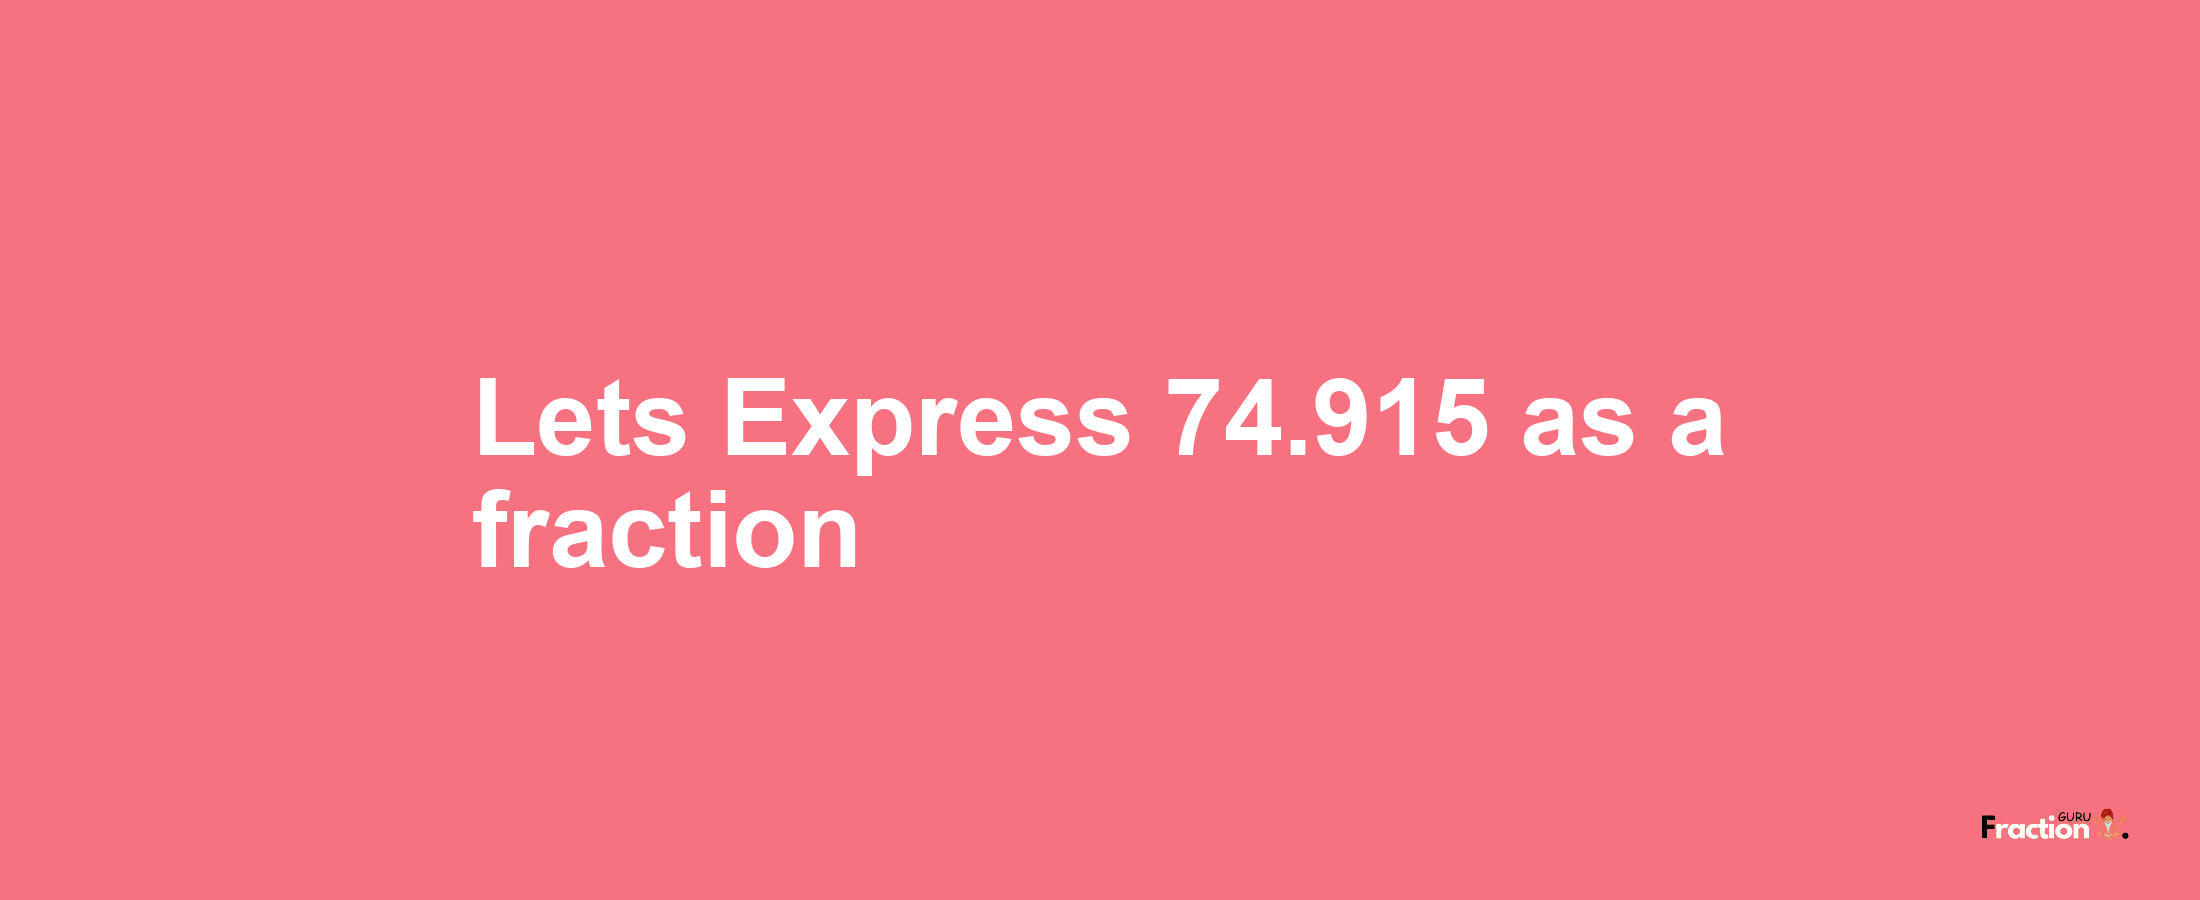 Lets Express 74.915 as afraction